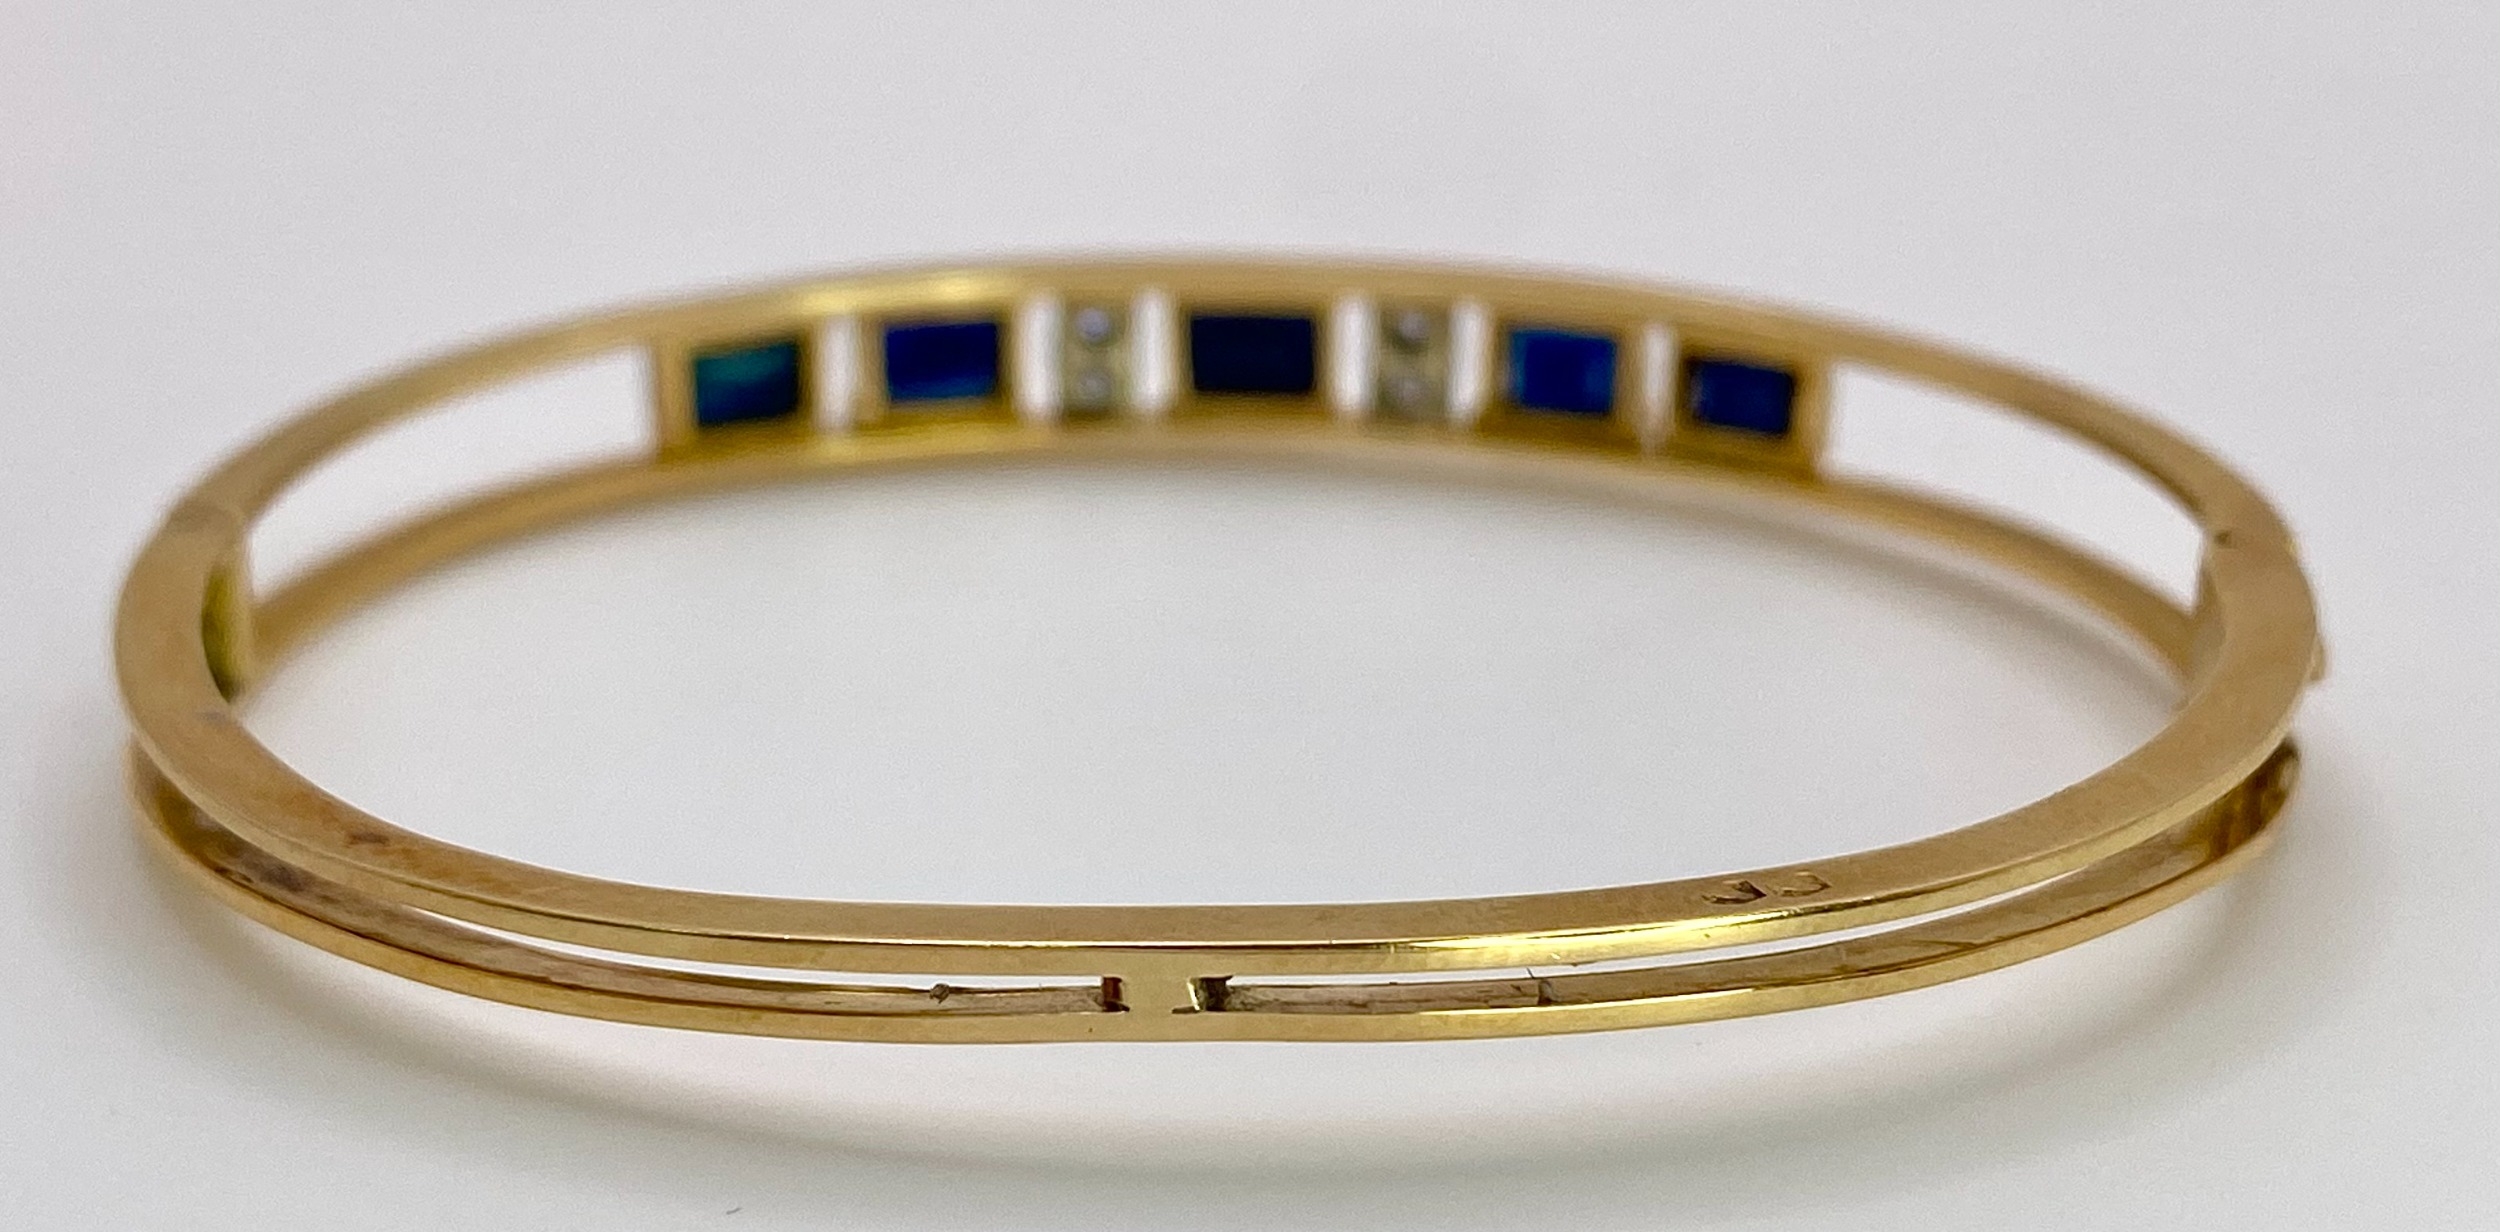 A 14K (TESTED AS) YELLOW GOLD BANGLE SET WITH 5 SAPPHIRES AND 4 DIAMONDS, 6CM DIAMETER, 15.9G (DIA: - Image 4 of 6